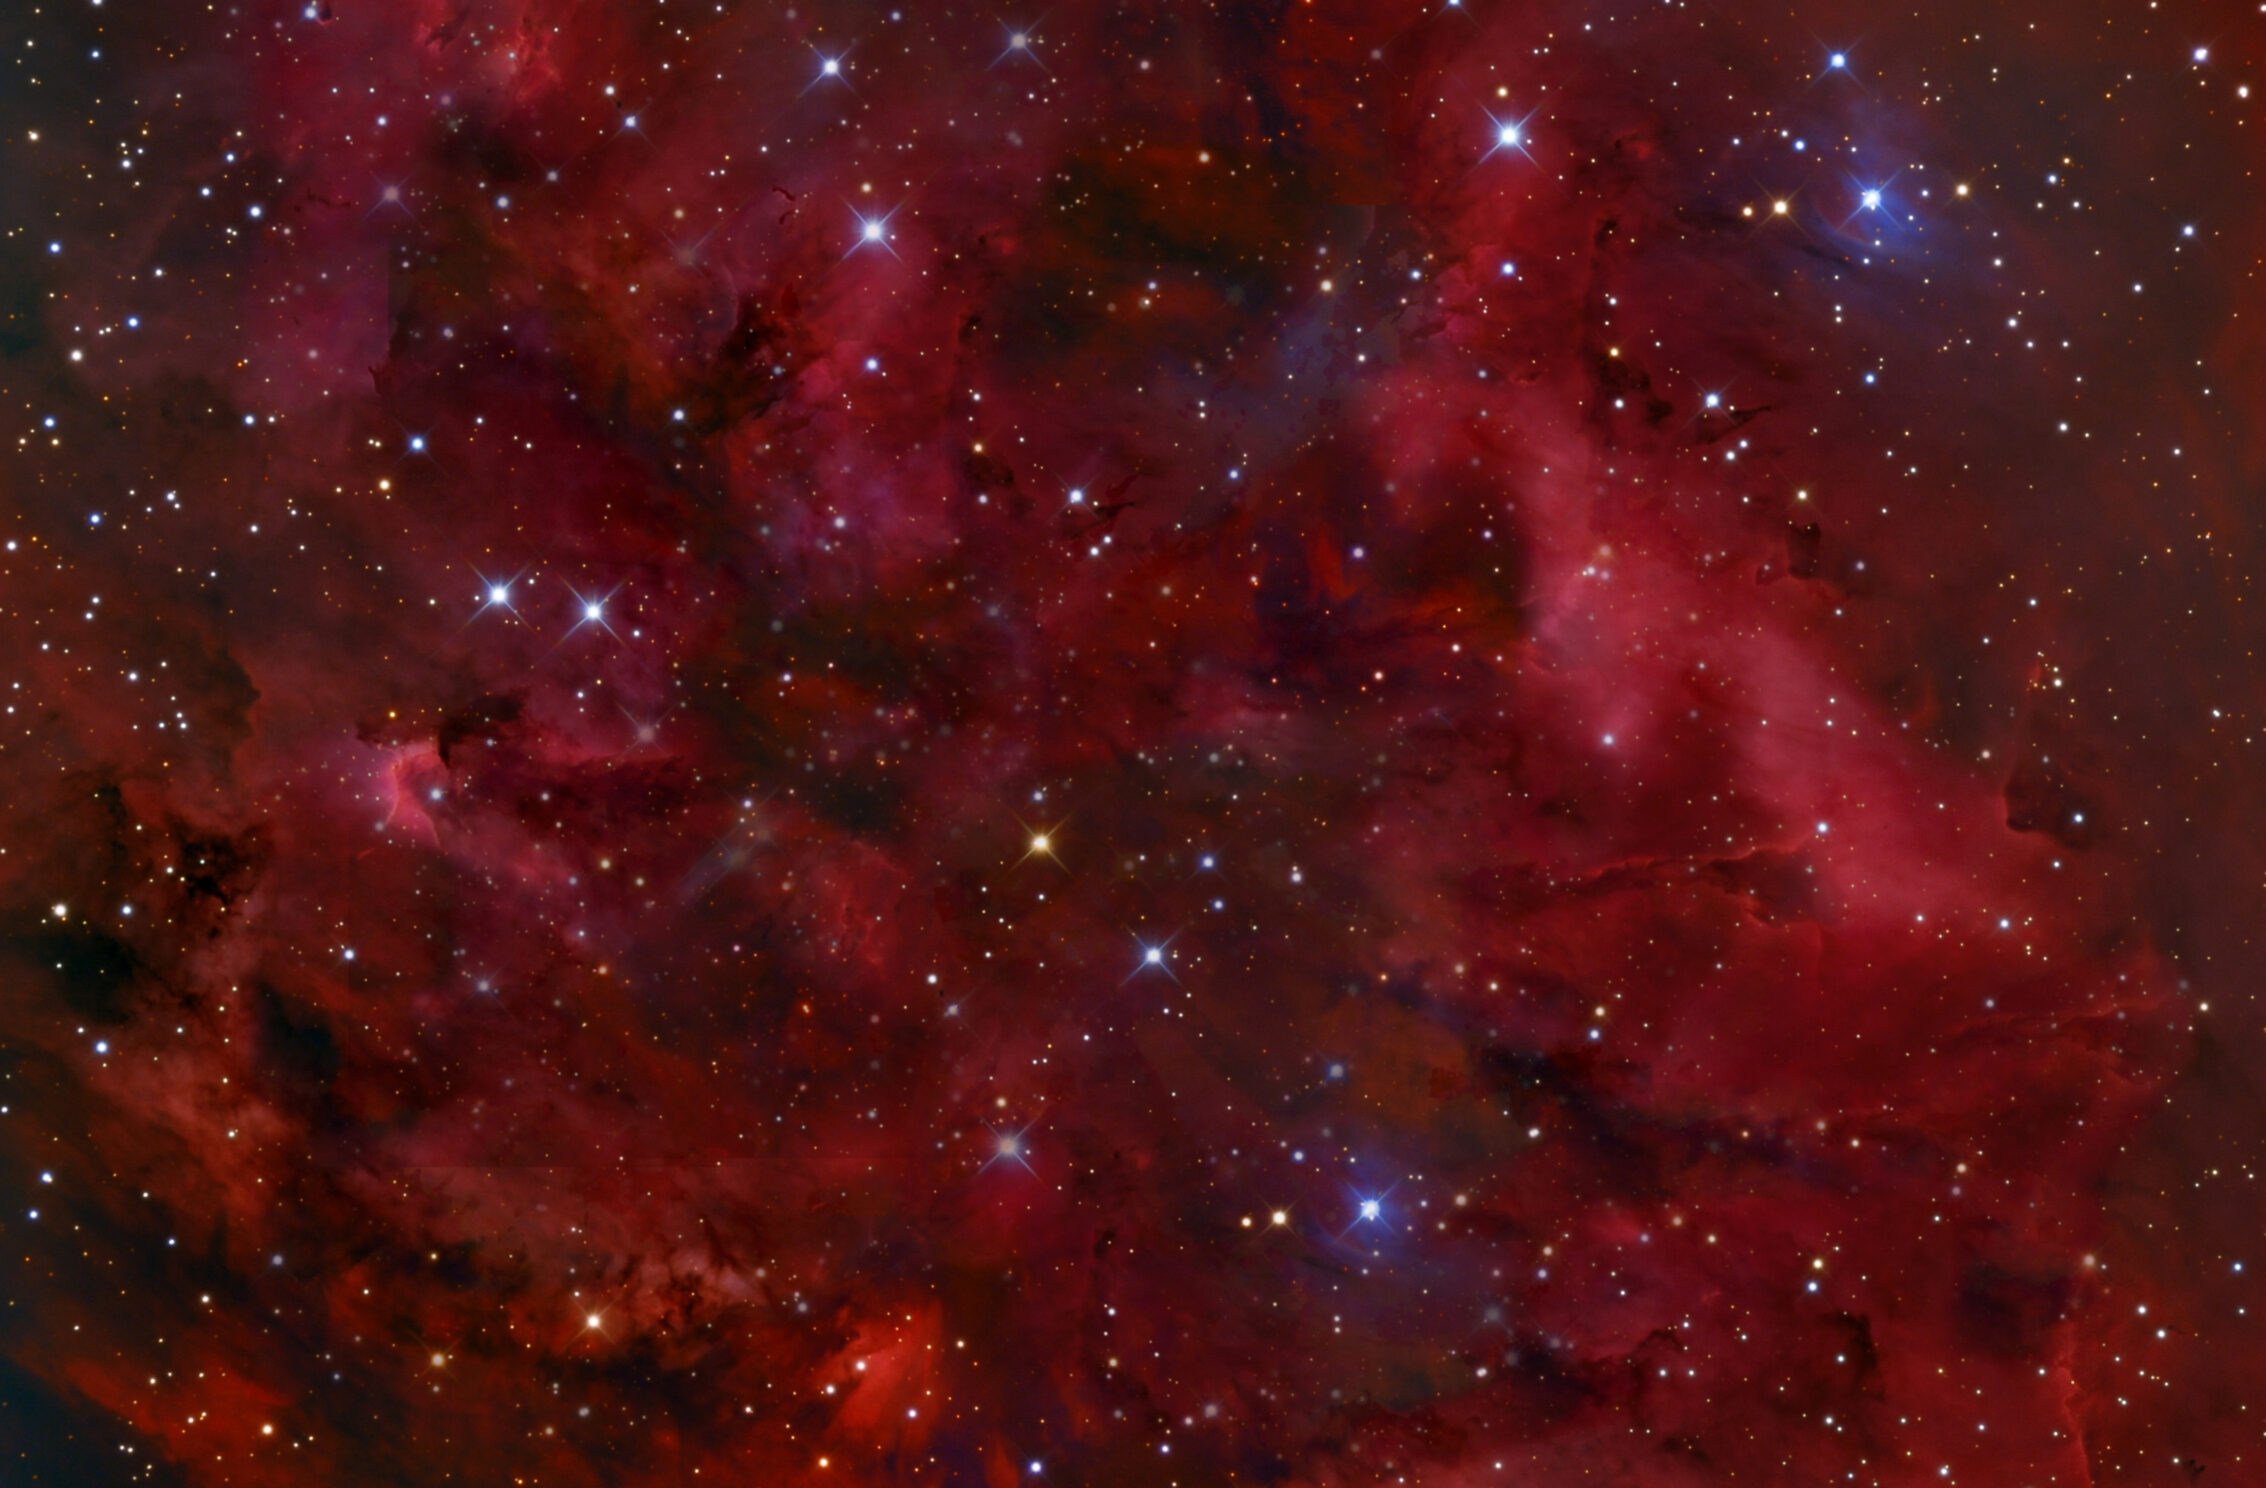 2266x1488 wallpaper Sky Spiral Galaxy Red Night Space Colorful Abstract iPad Wallpaper 2266x1488 pixels resolution